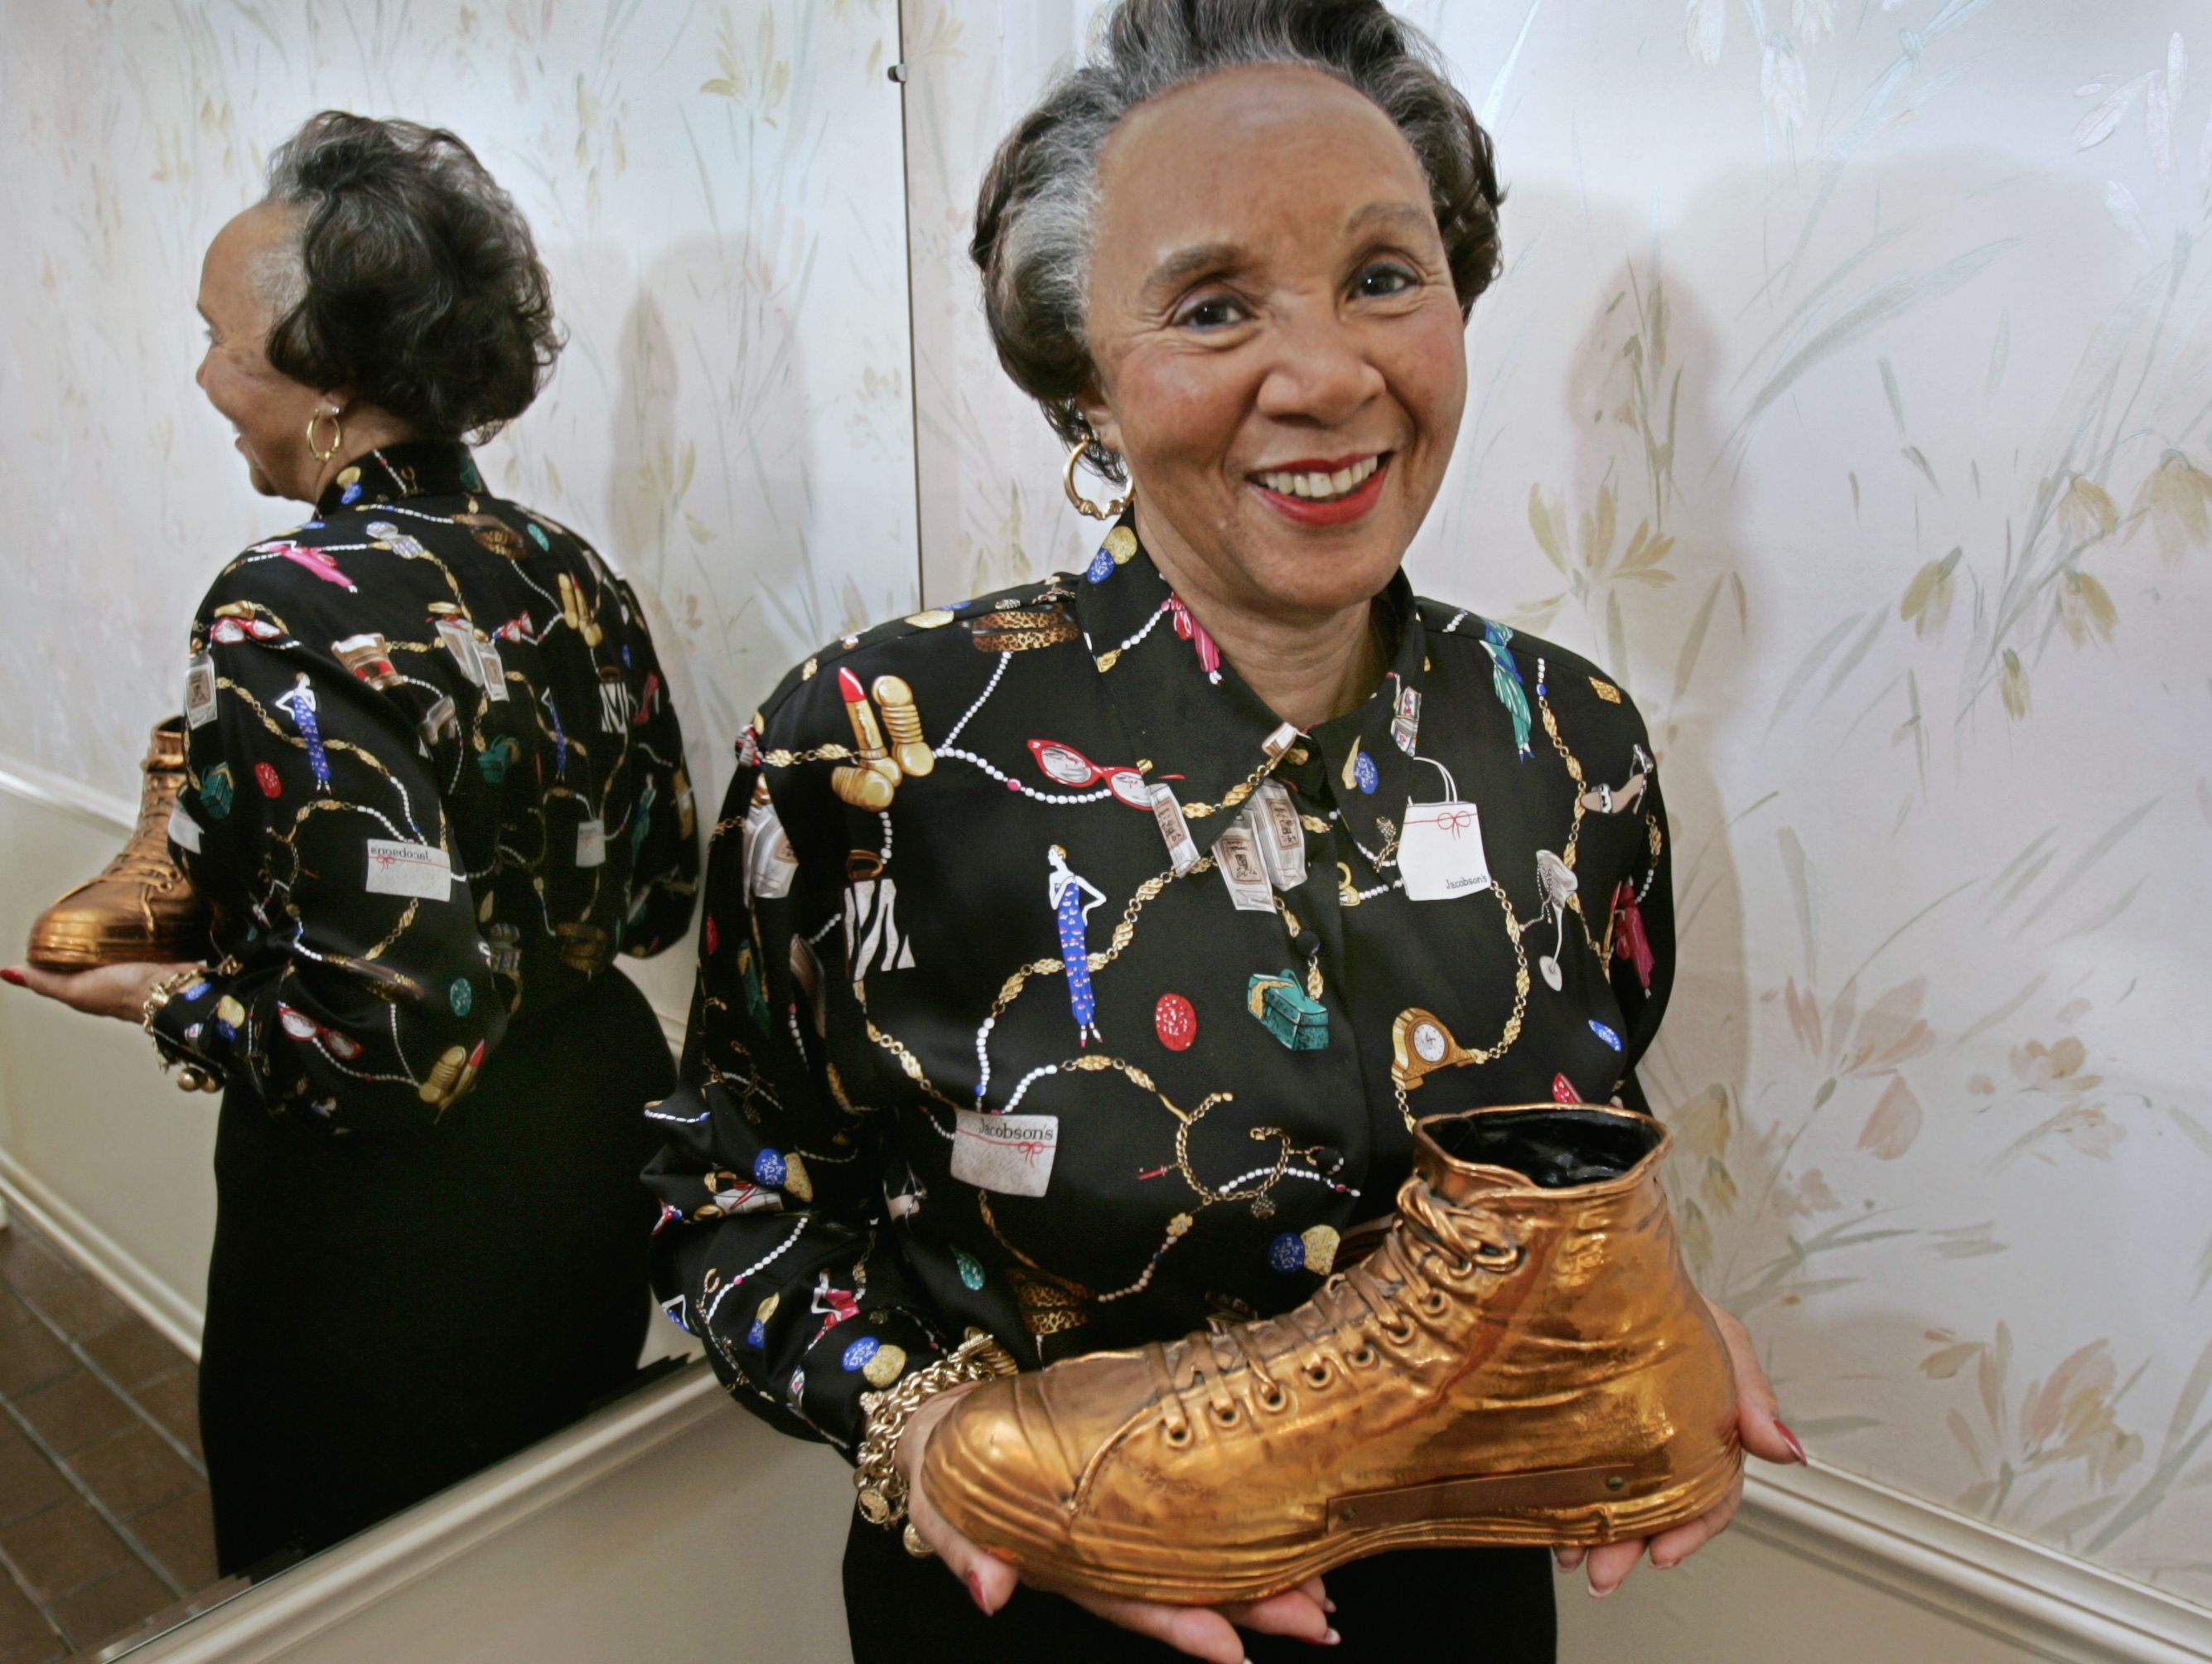 Betty Crowe was the wife of Ray Crowe when he coached Crispus Attucks to two state basketball titles in 1955 and 1956. Betty Crowe shows a piece of her Crispus Attucks basketball memorabilia, the brass-coated basketball shoe from former Attucks player, Oscar Robertson, who went on to great basketball fame.